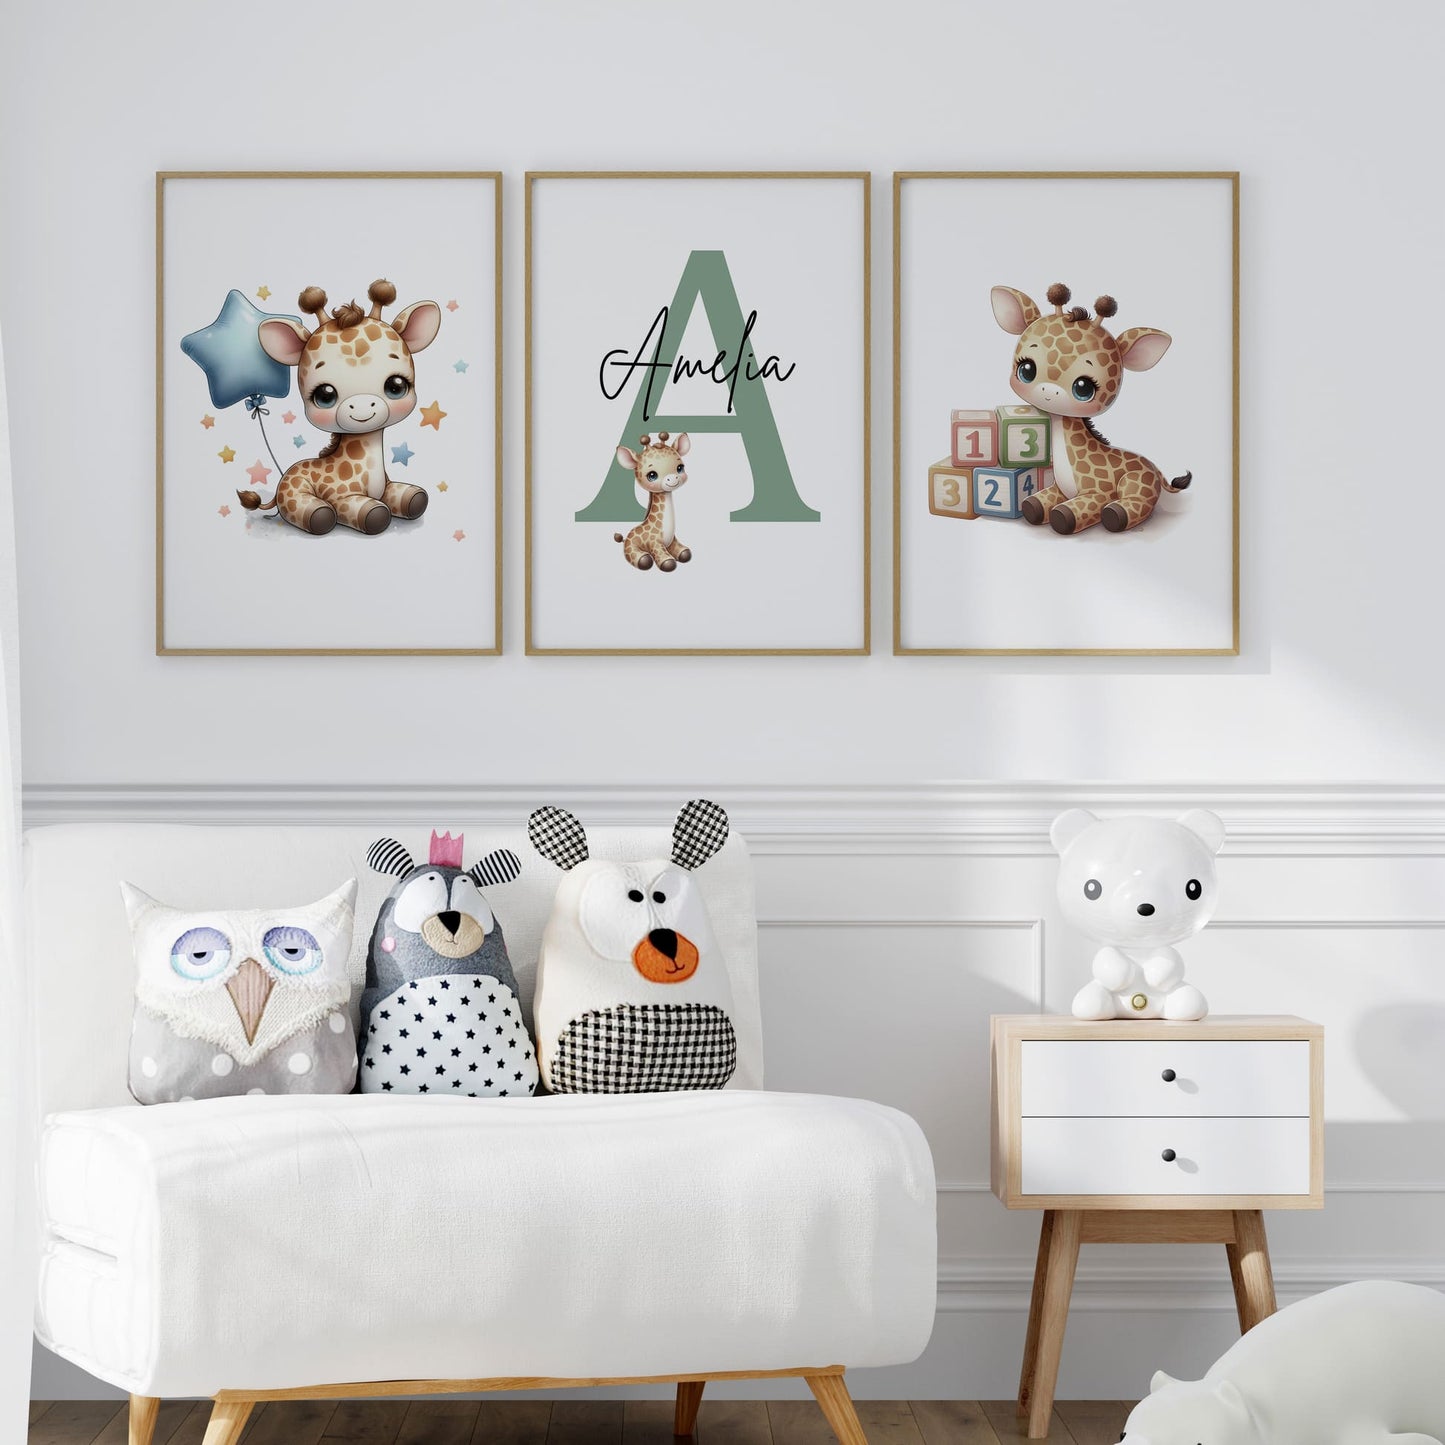 Set of three A4 prints in watercolour style. Each print depicts a cartoon baby giraffe In the first print, the giraffe sits by counting blocks; in the second, it holds a balloon. The middle giraffe is smaller than the other two, with a large initial in the background. A personalised name in black overlays the initial.